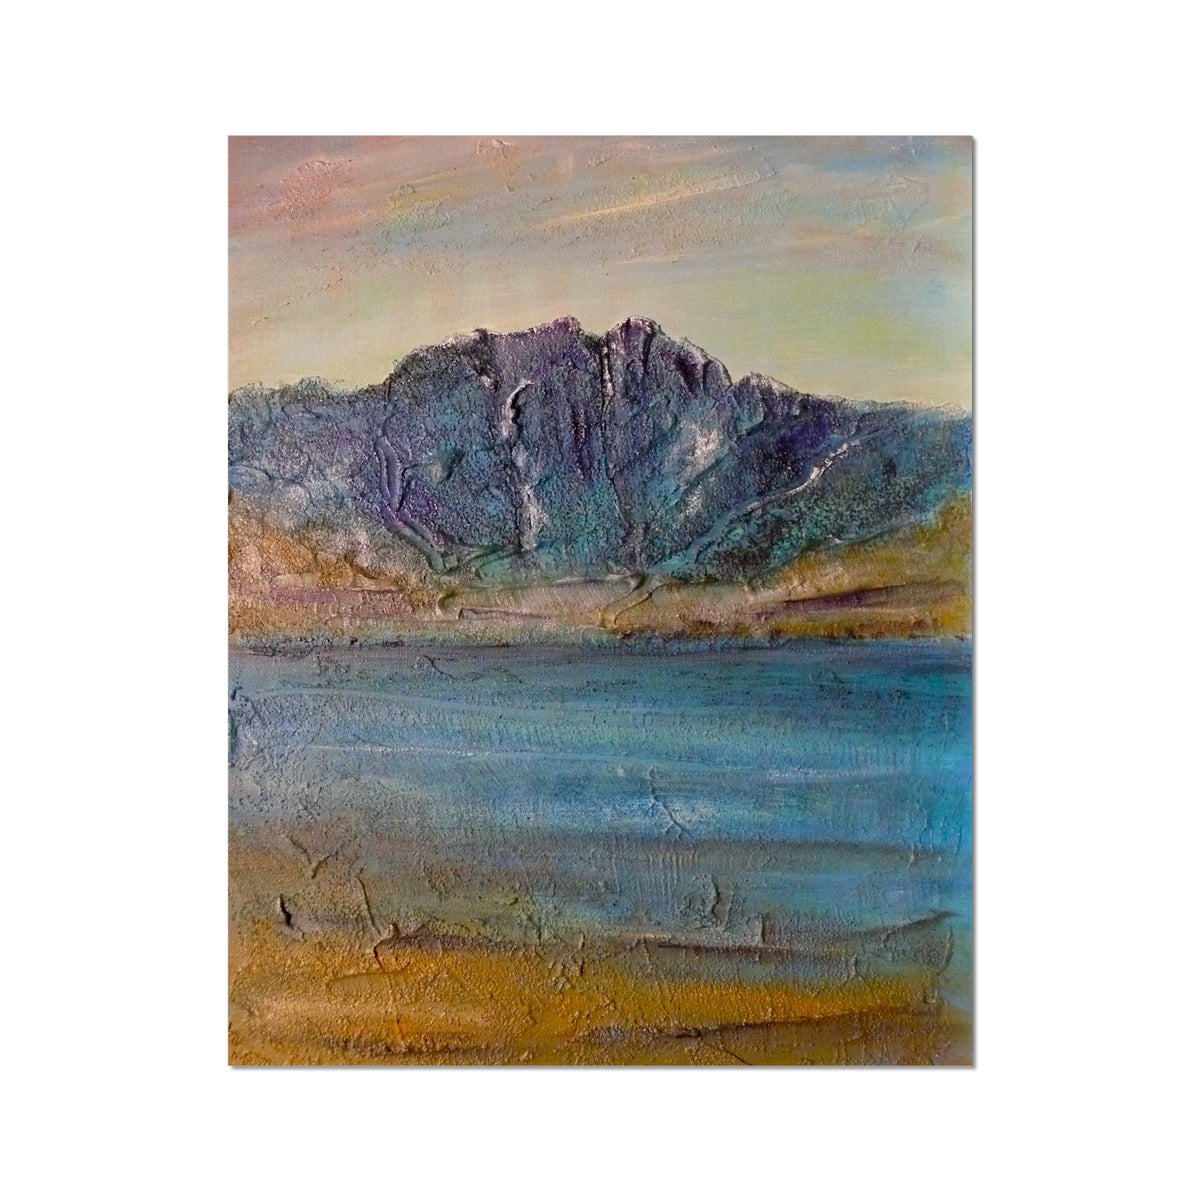 Torridon Painting | Artist Proof Collector Prints From Scotland-Artist Proof Collector Prints-Scottish Lochs & Mountains Art Gallery-16"x20"-Paintings, Prints, Homeware, Art Gifts From Scotland By Scottish Artist Kevin Hunter